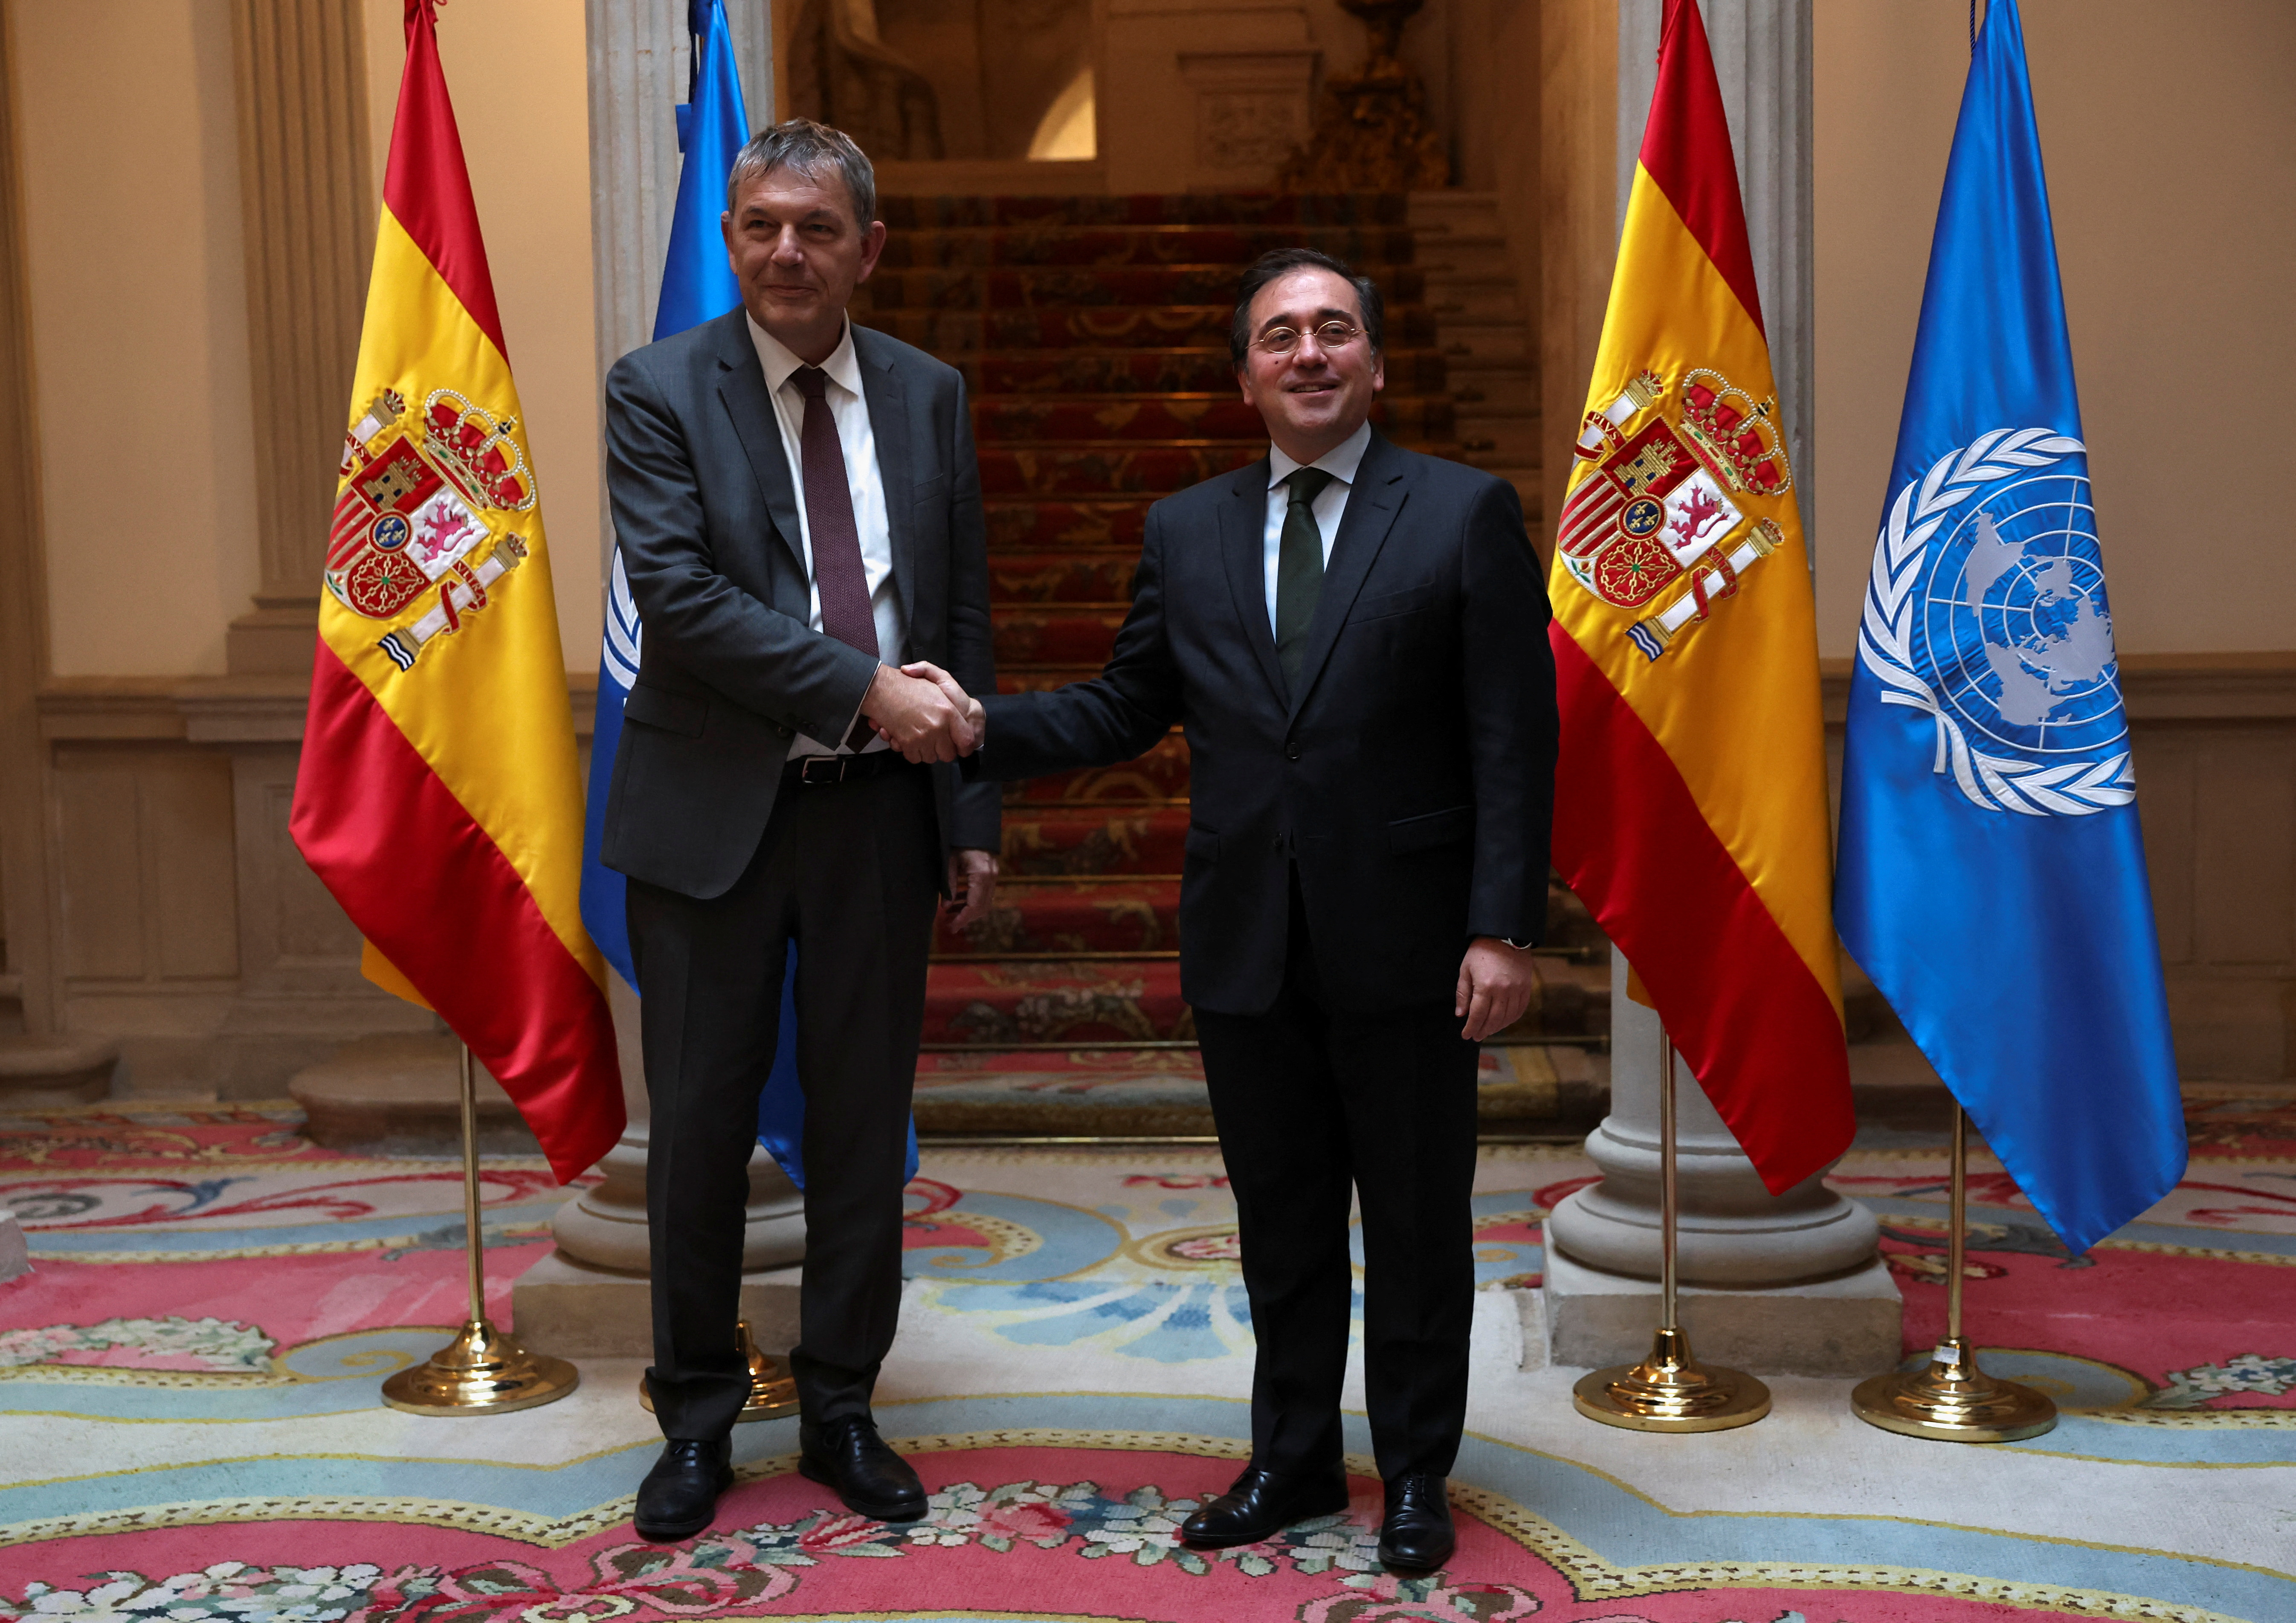 Spain's Foreign Minister Jose Manuel Albares ahead of meeting with UNRWA Commissioner-General Philippe Lazzarini in Madrid